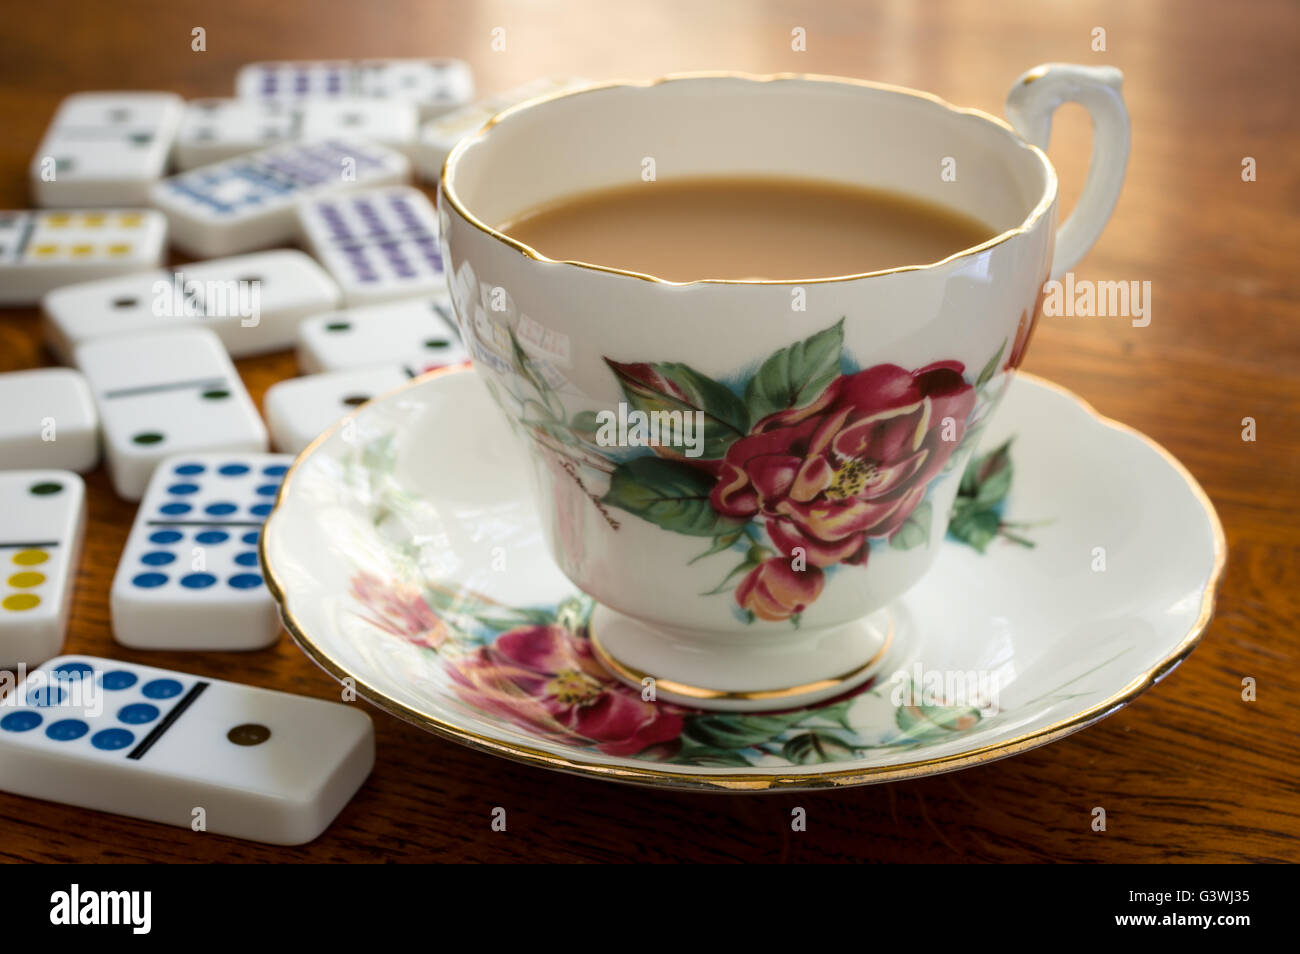 Relaxing cup of tea and a game of domino's Stock Photo